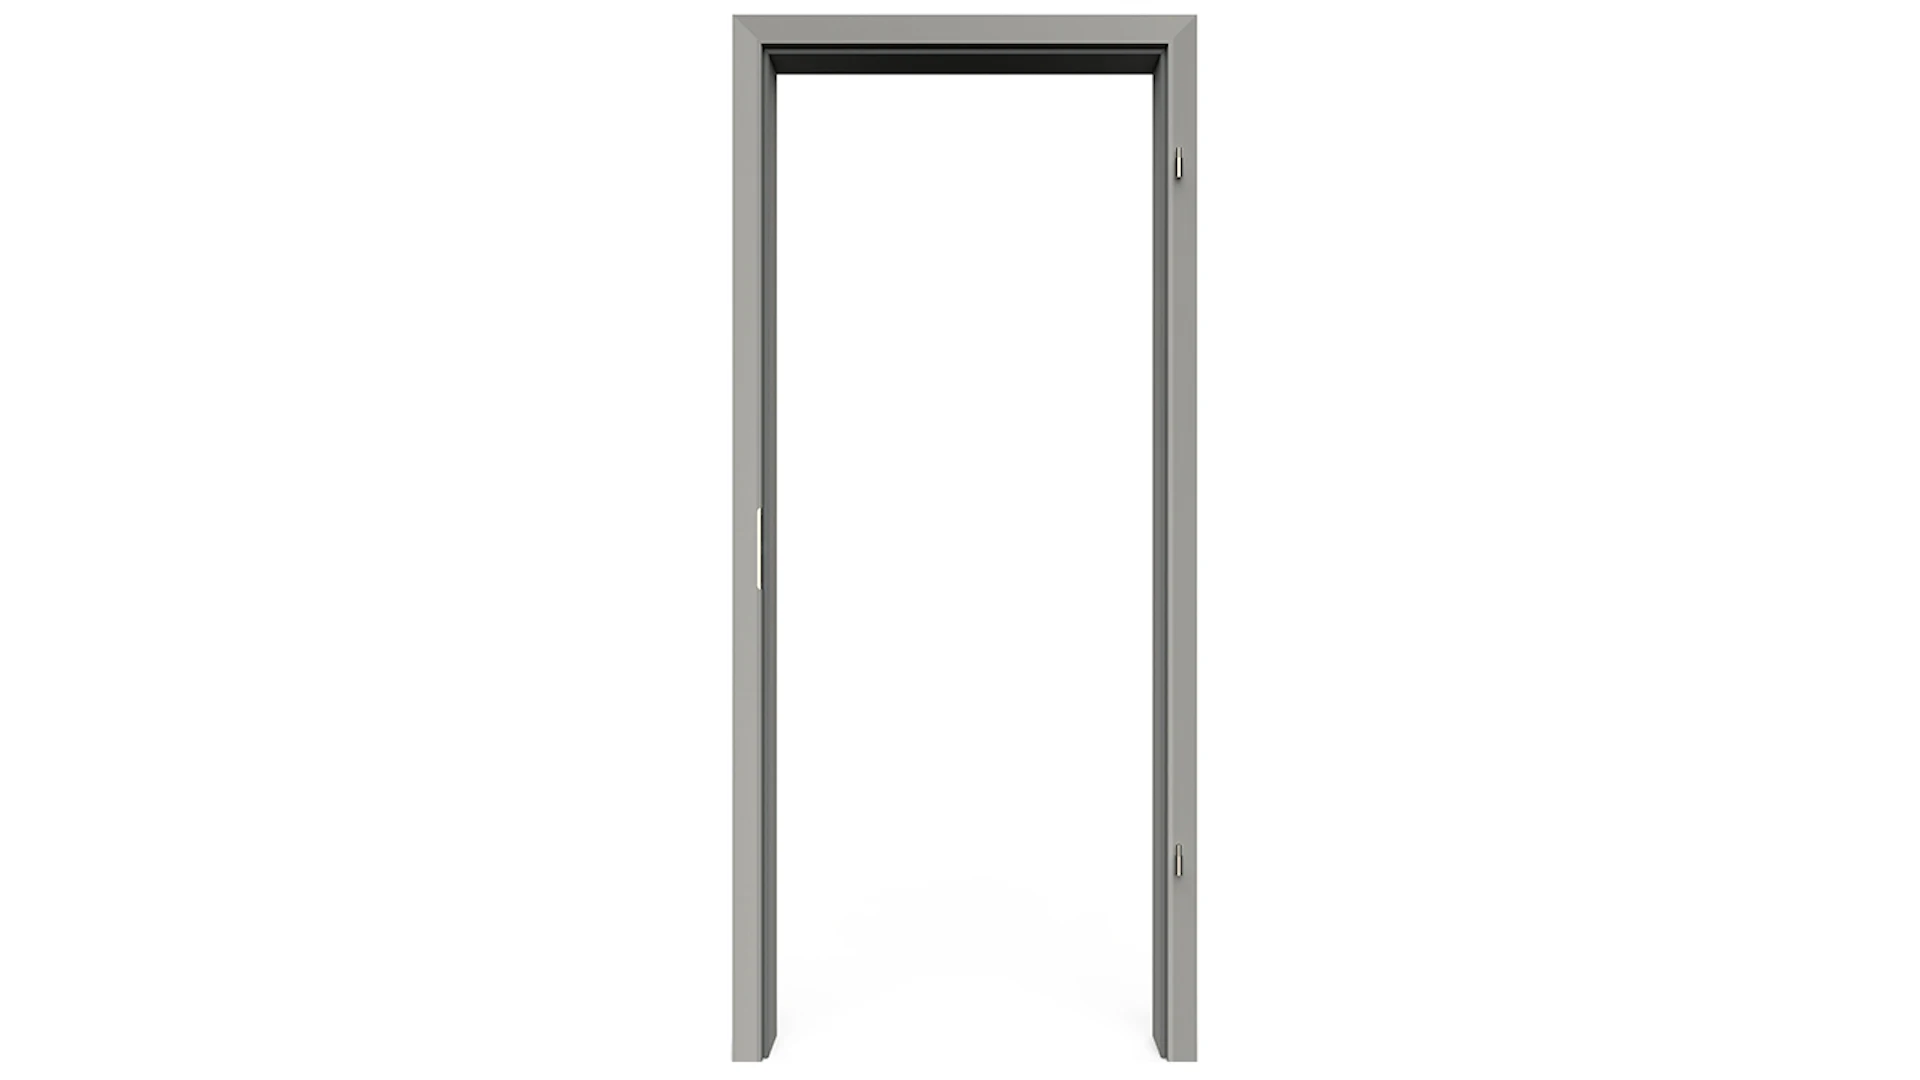 planeo Standard Door frame, rounded edge - CPL Silver grey - 2110 x 610 x 120 mm DIN Left